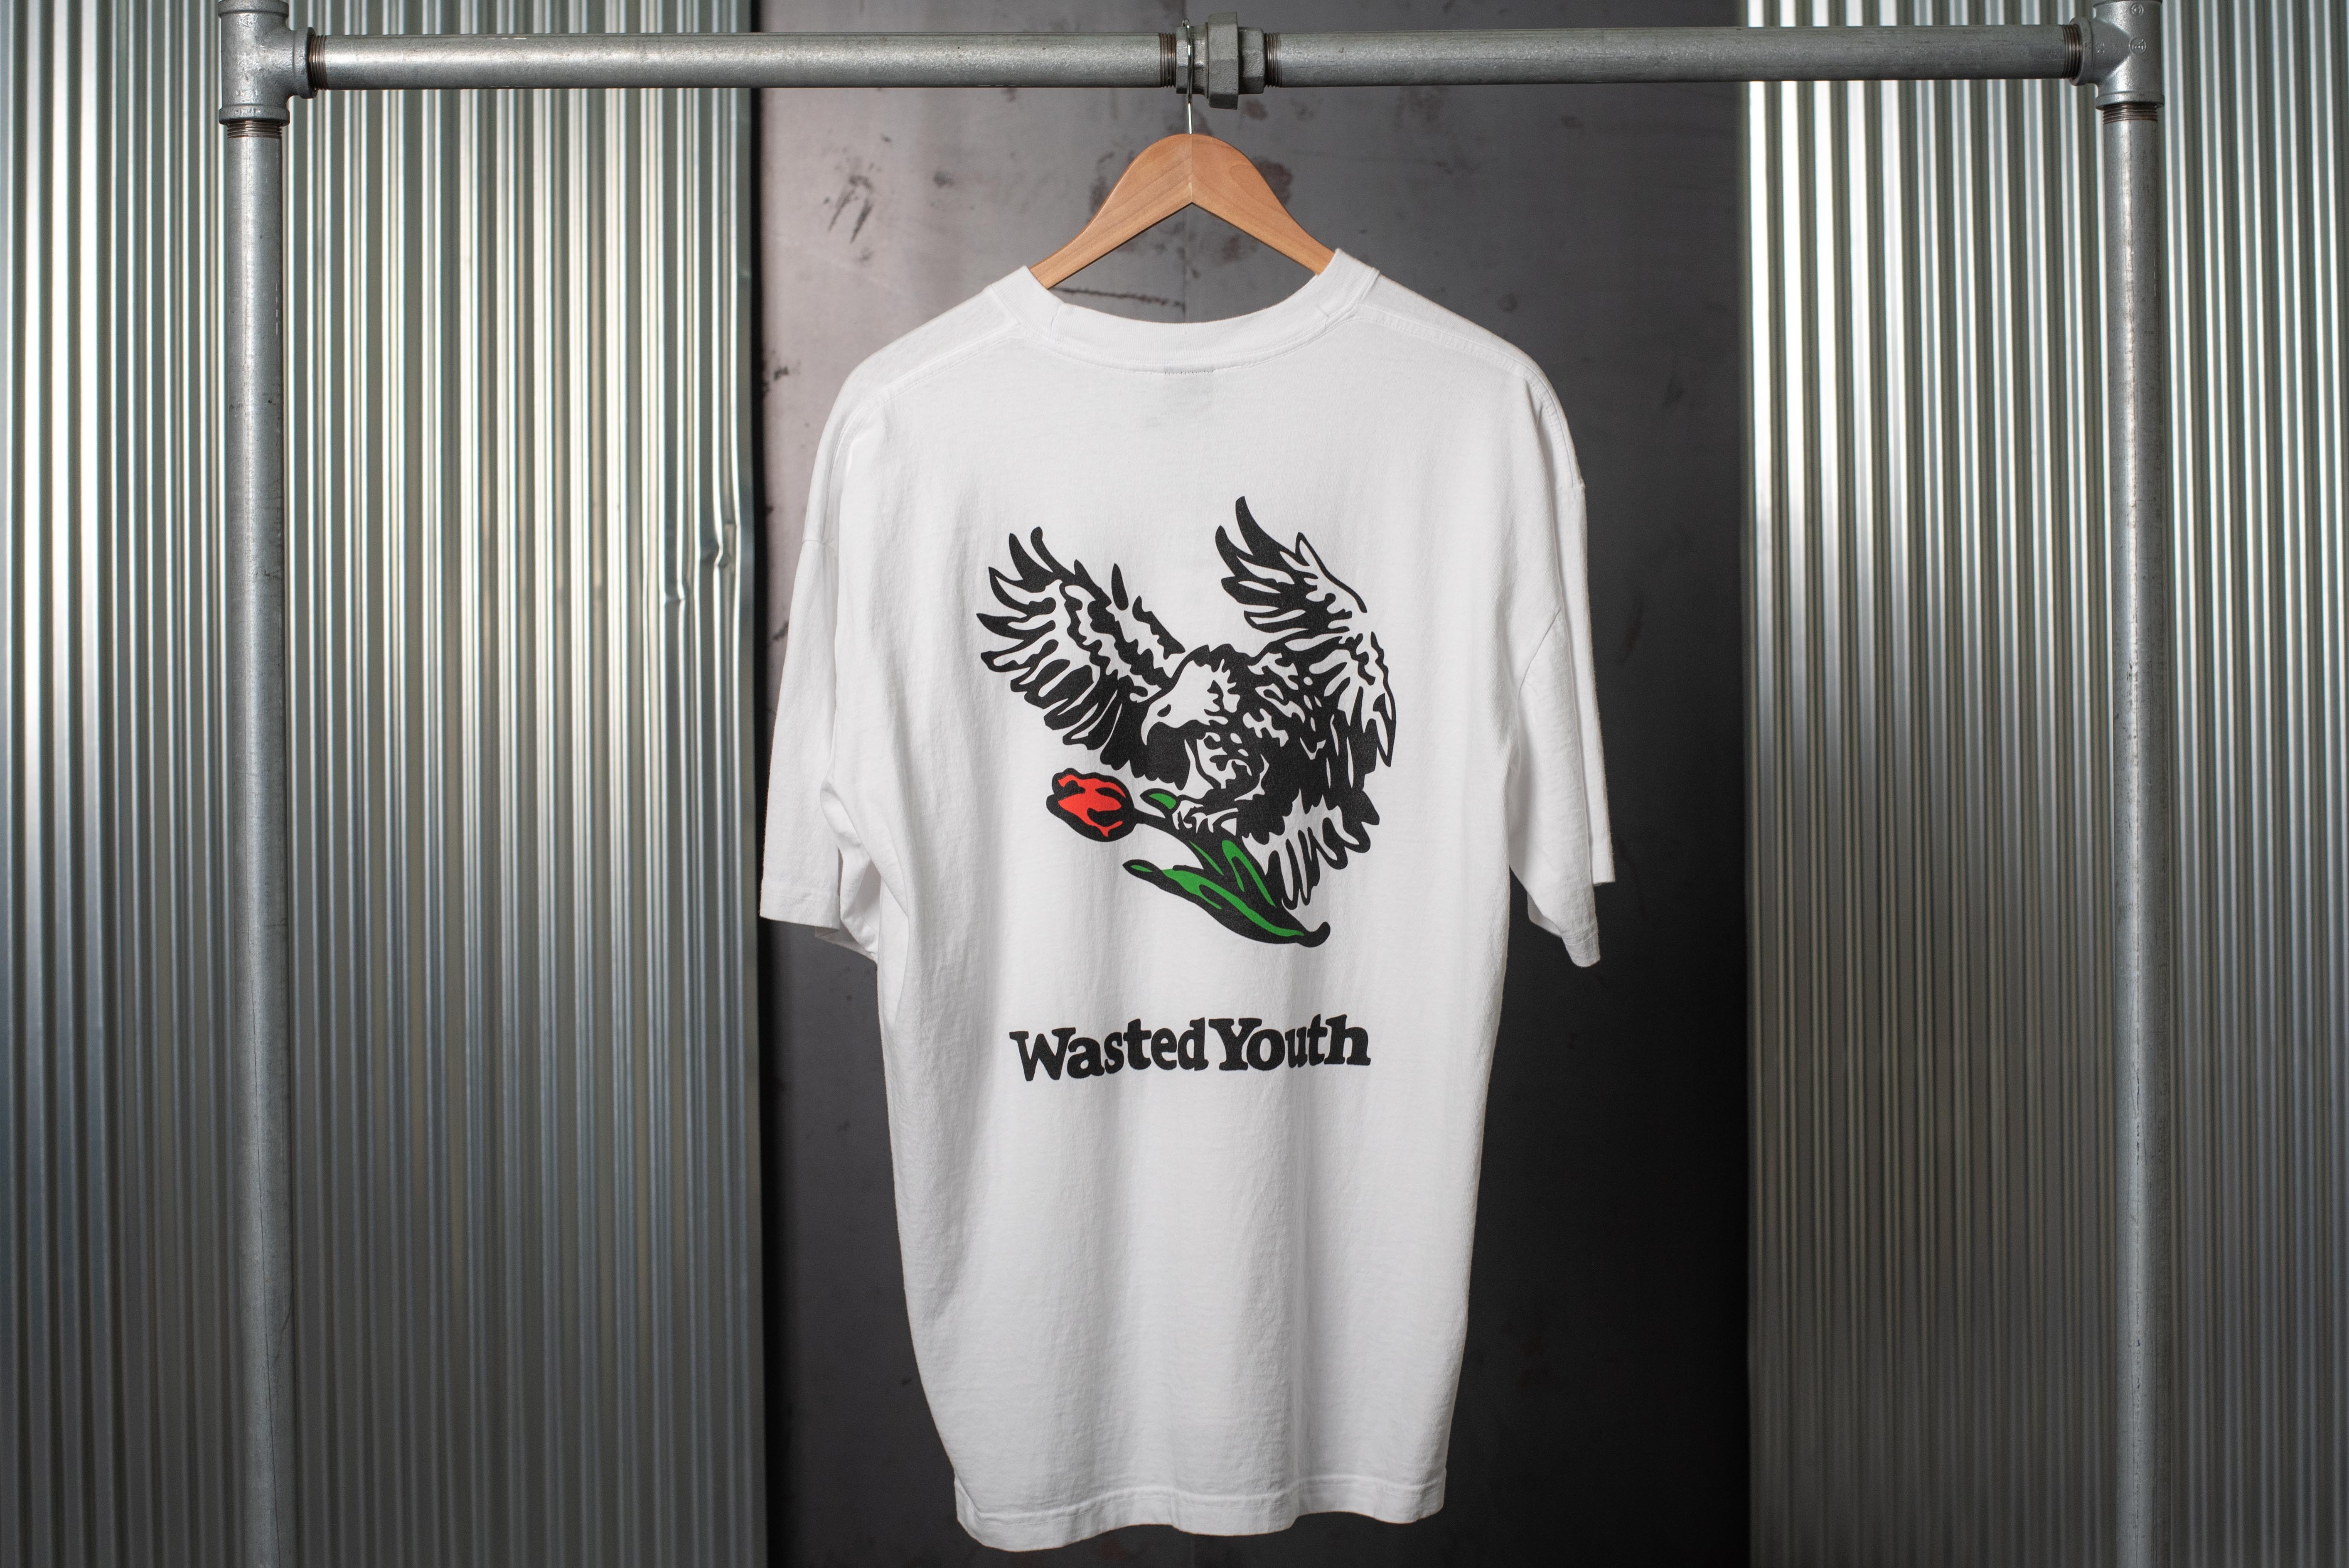 US限定 WASTED YOUTH WHITE EAGLE T-SHIRThumanmade